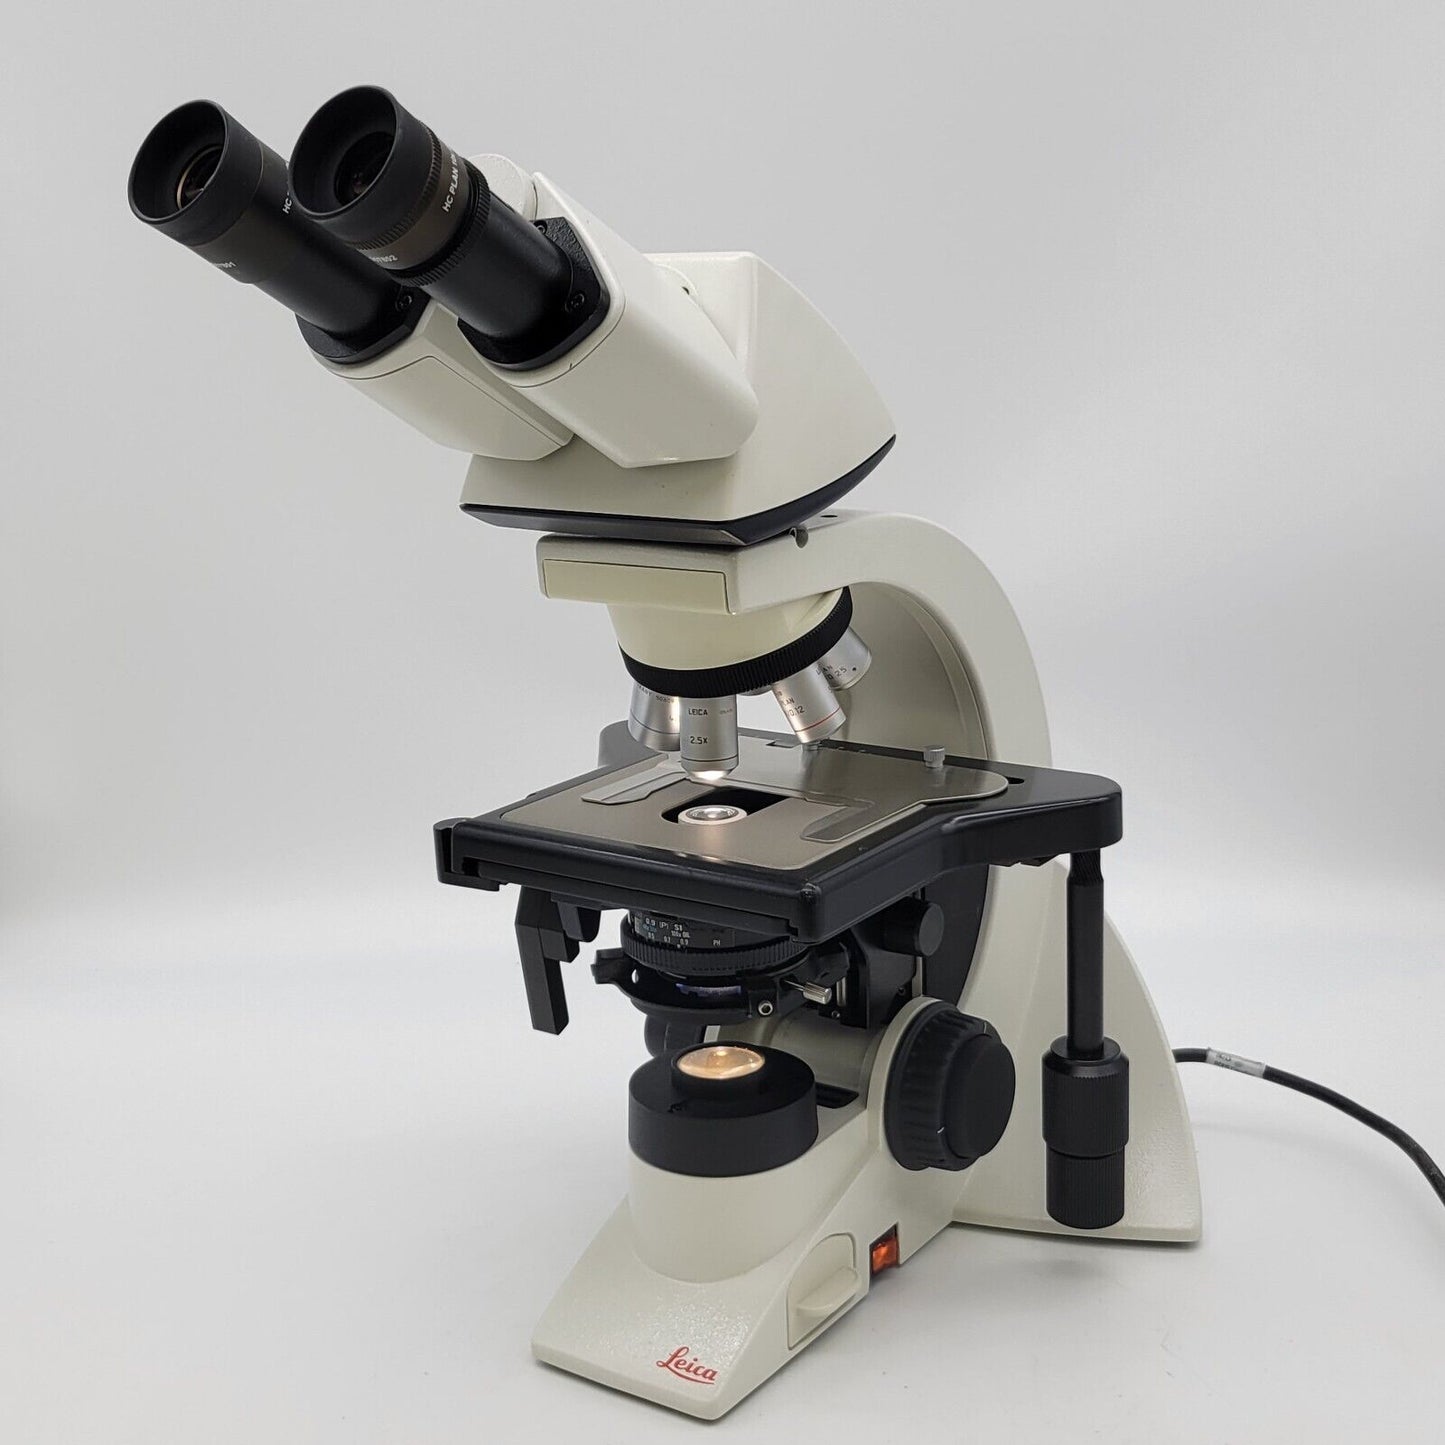 Refurbished Used Leica Microscope DM1000 with Objective for Mohs – Marketplace